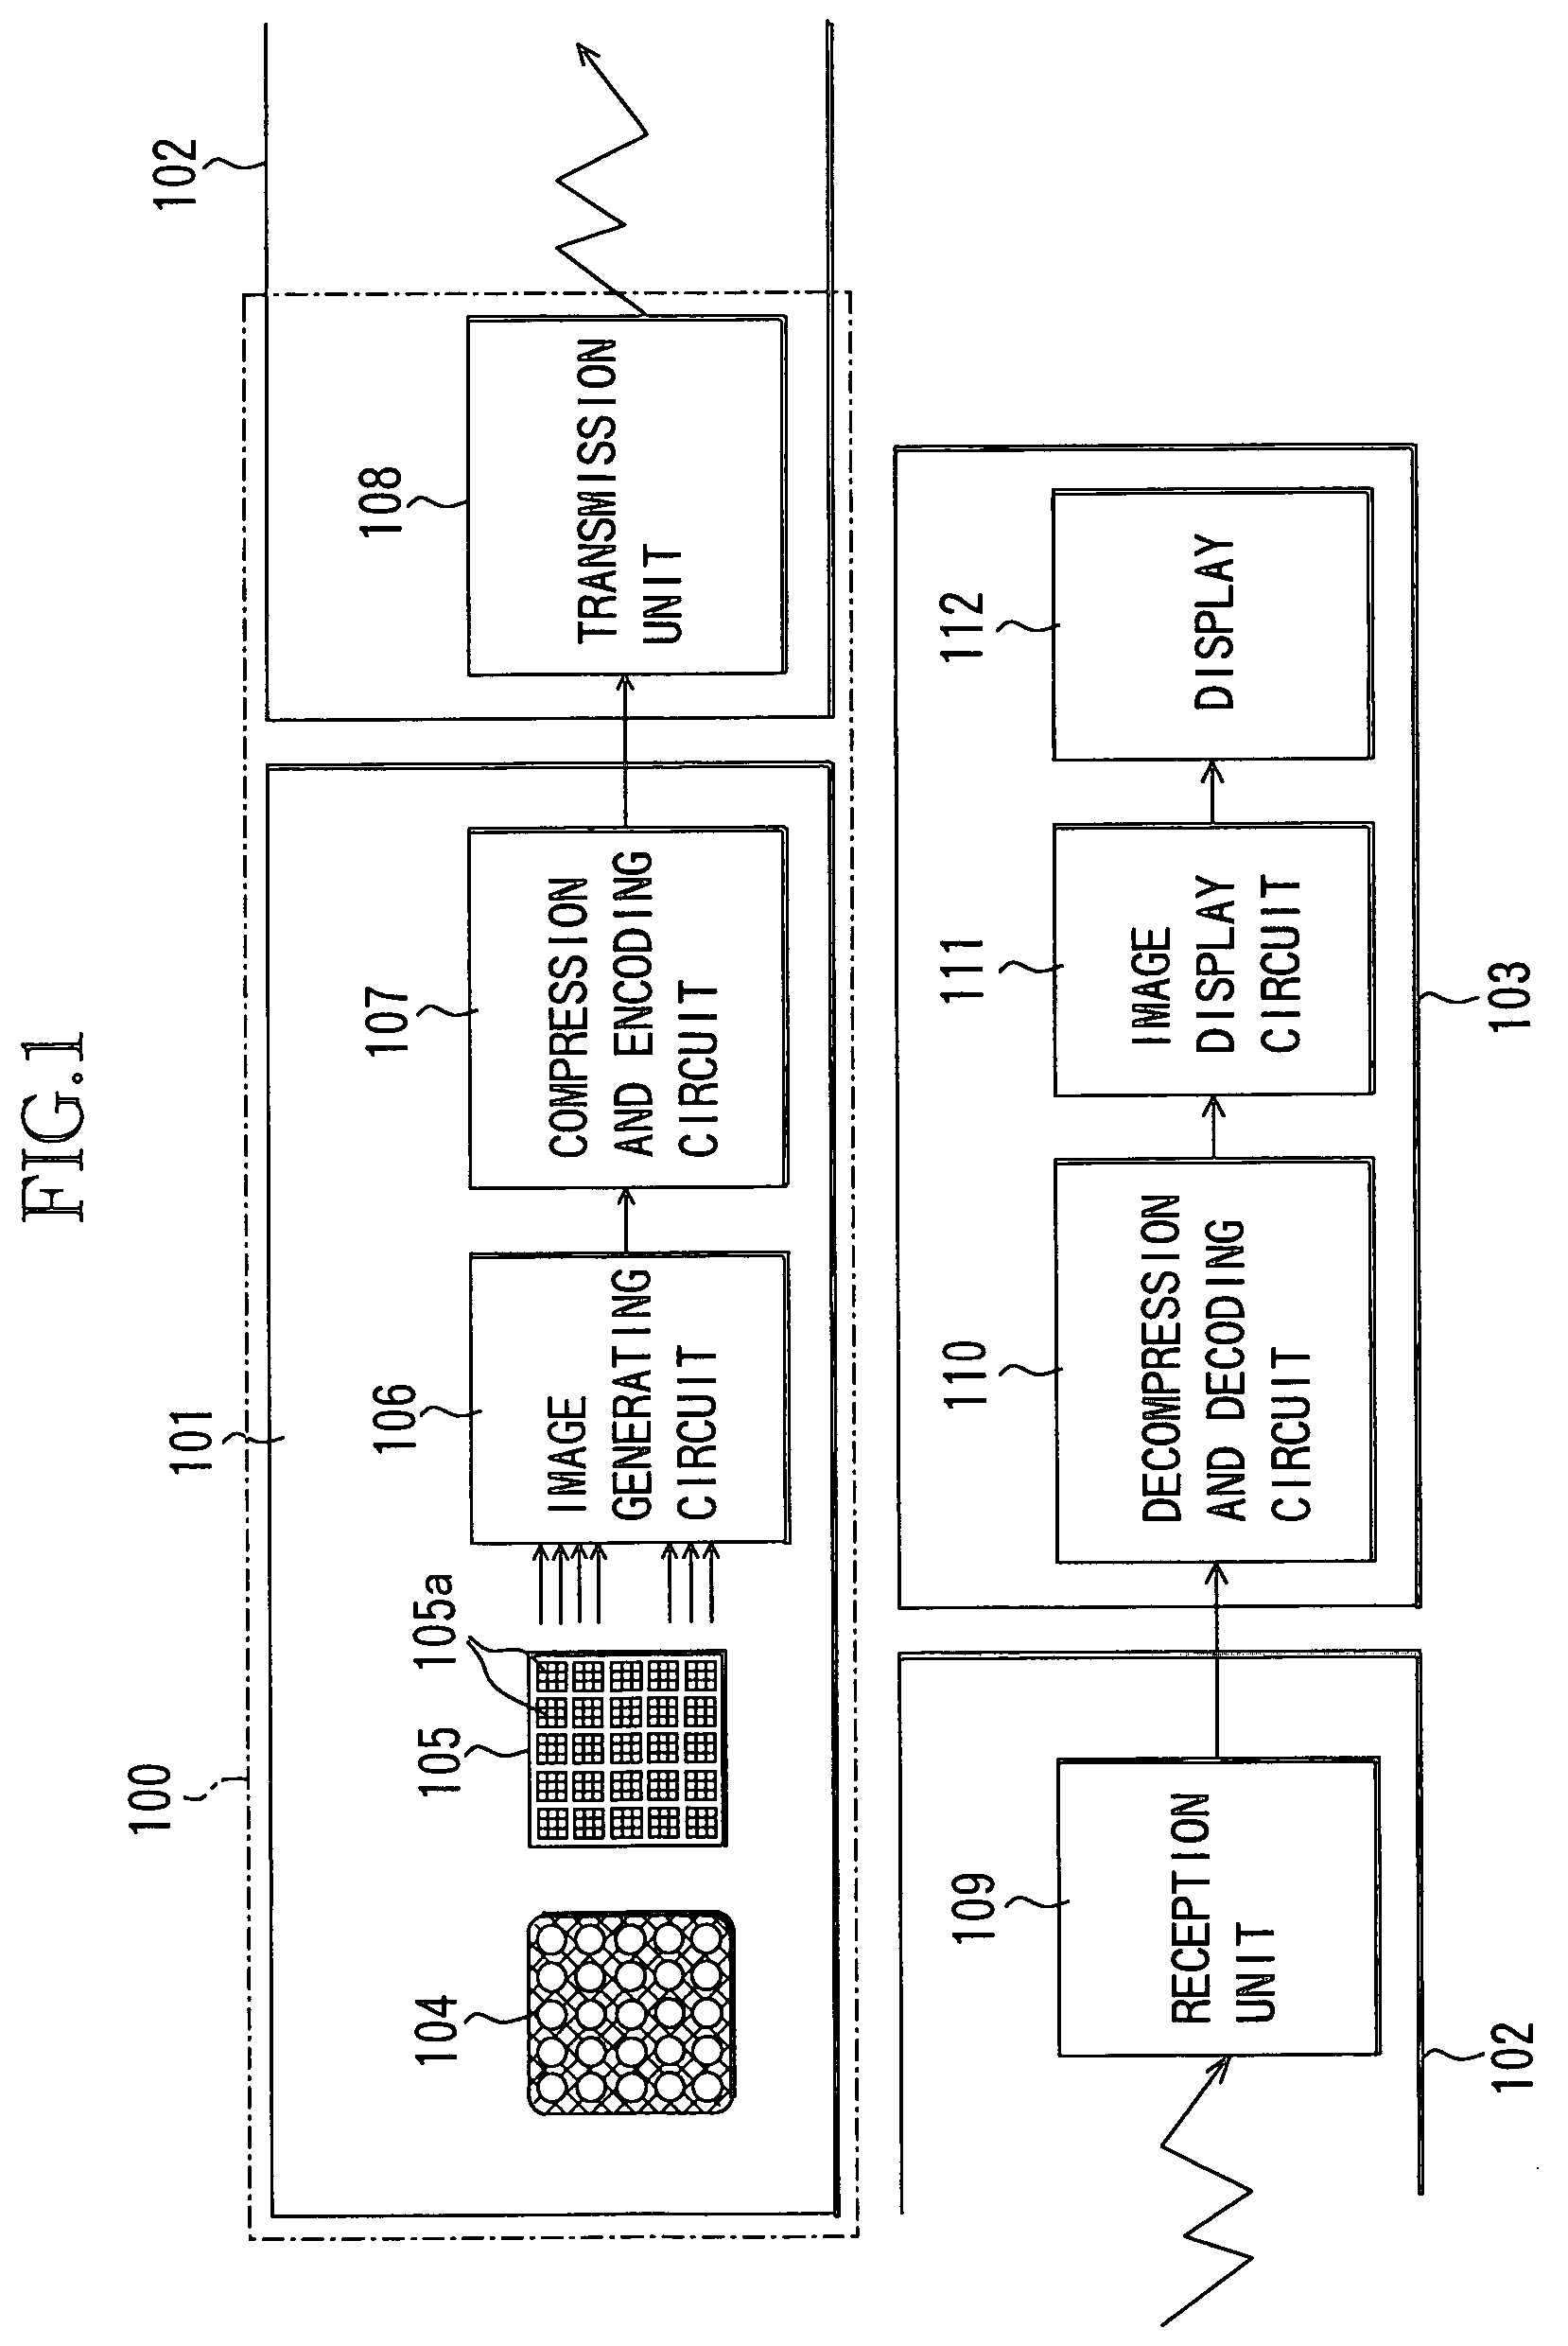 Image-taking apparatus and monitoring system